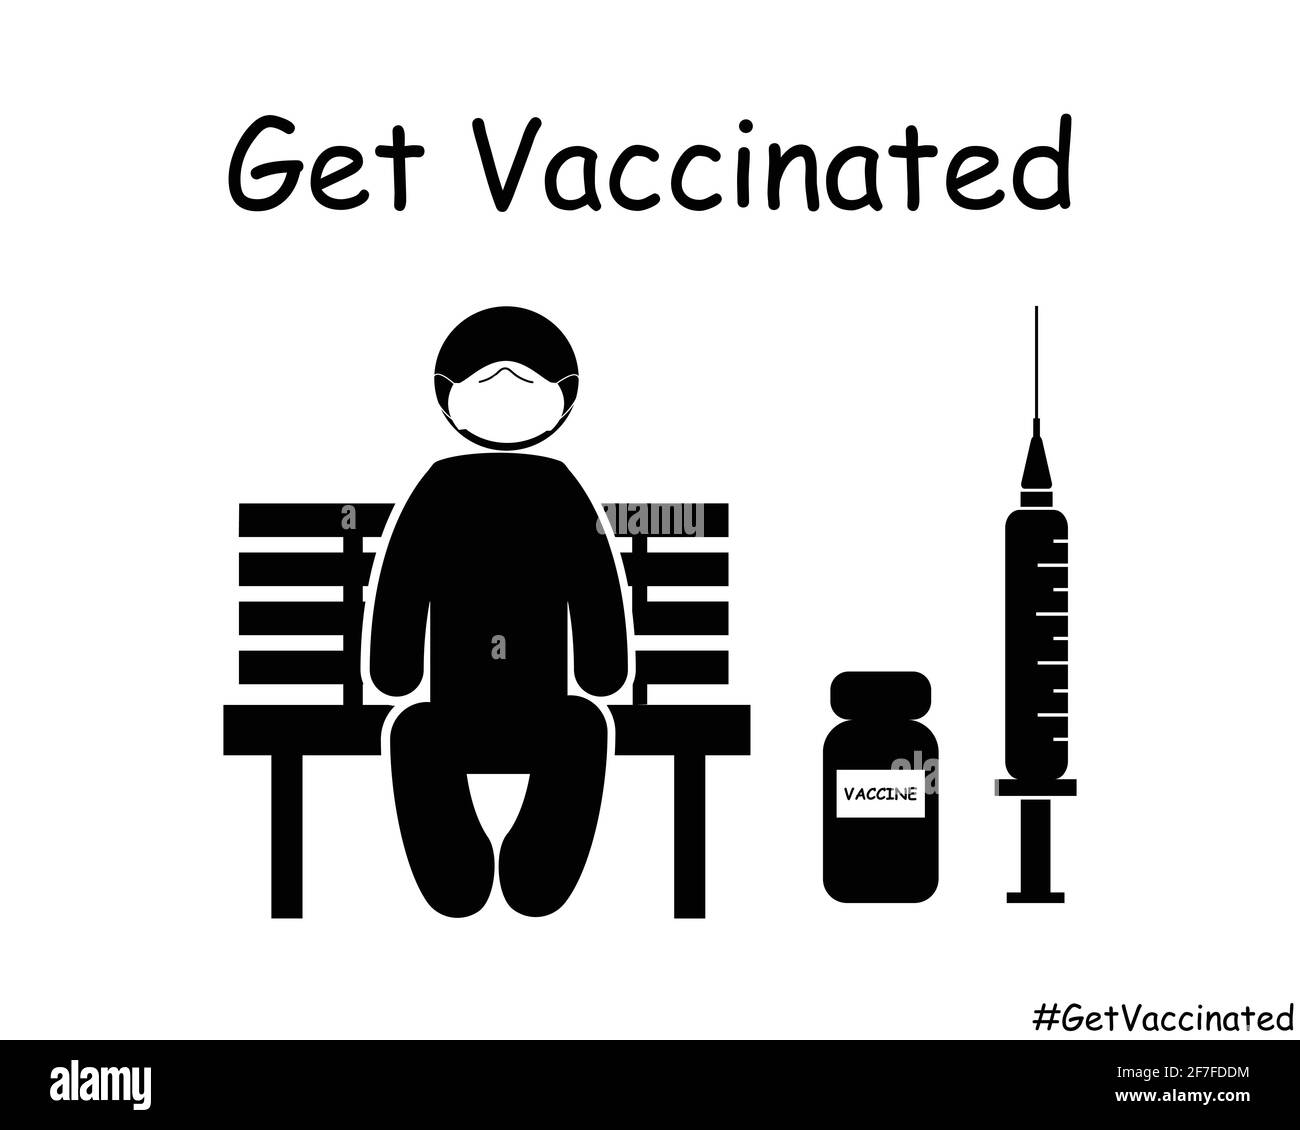 Get Vaccinated Stick Figure Man on Bench. Black and White Vector Icon Stock Vector